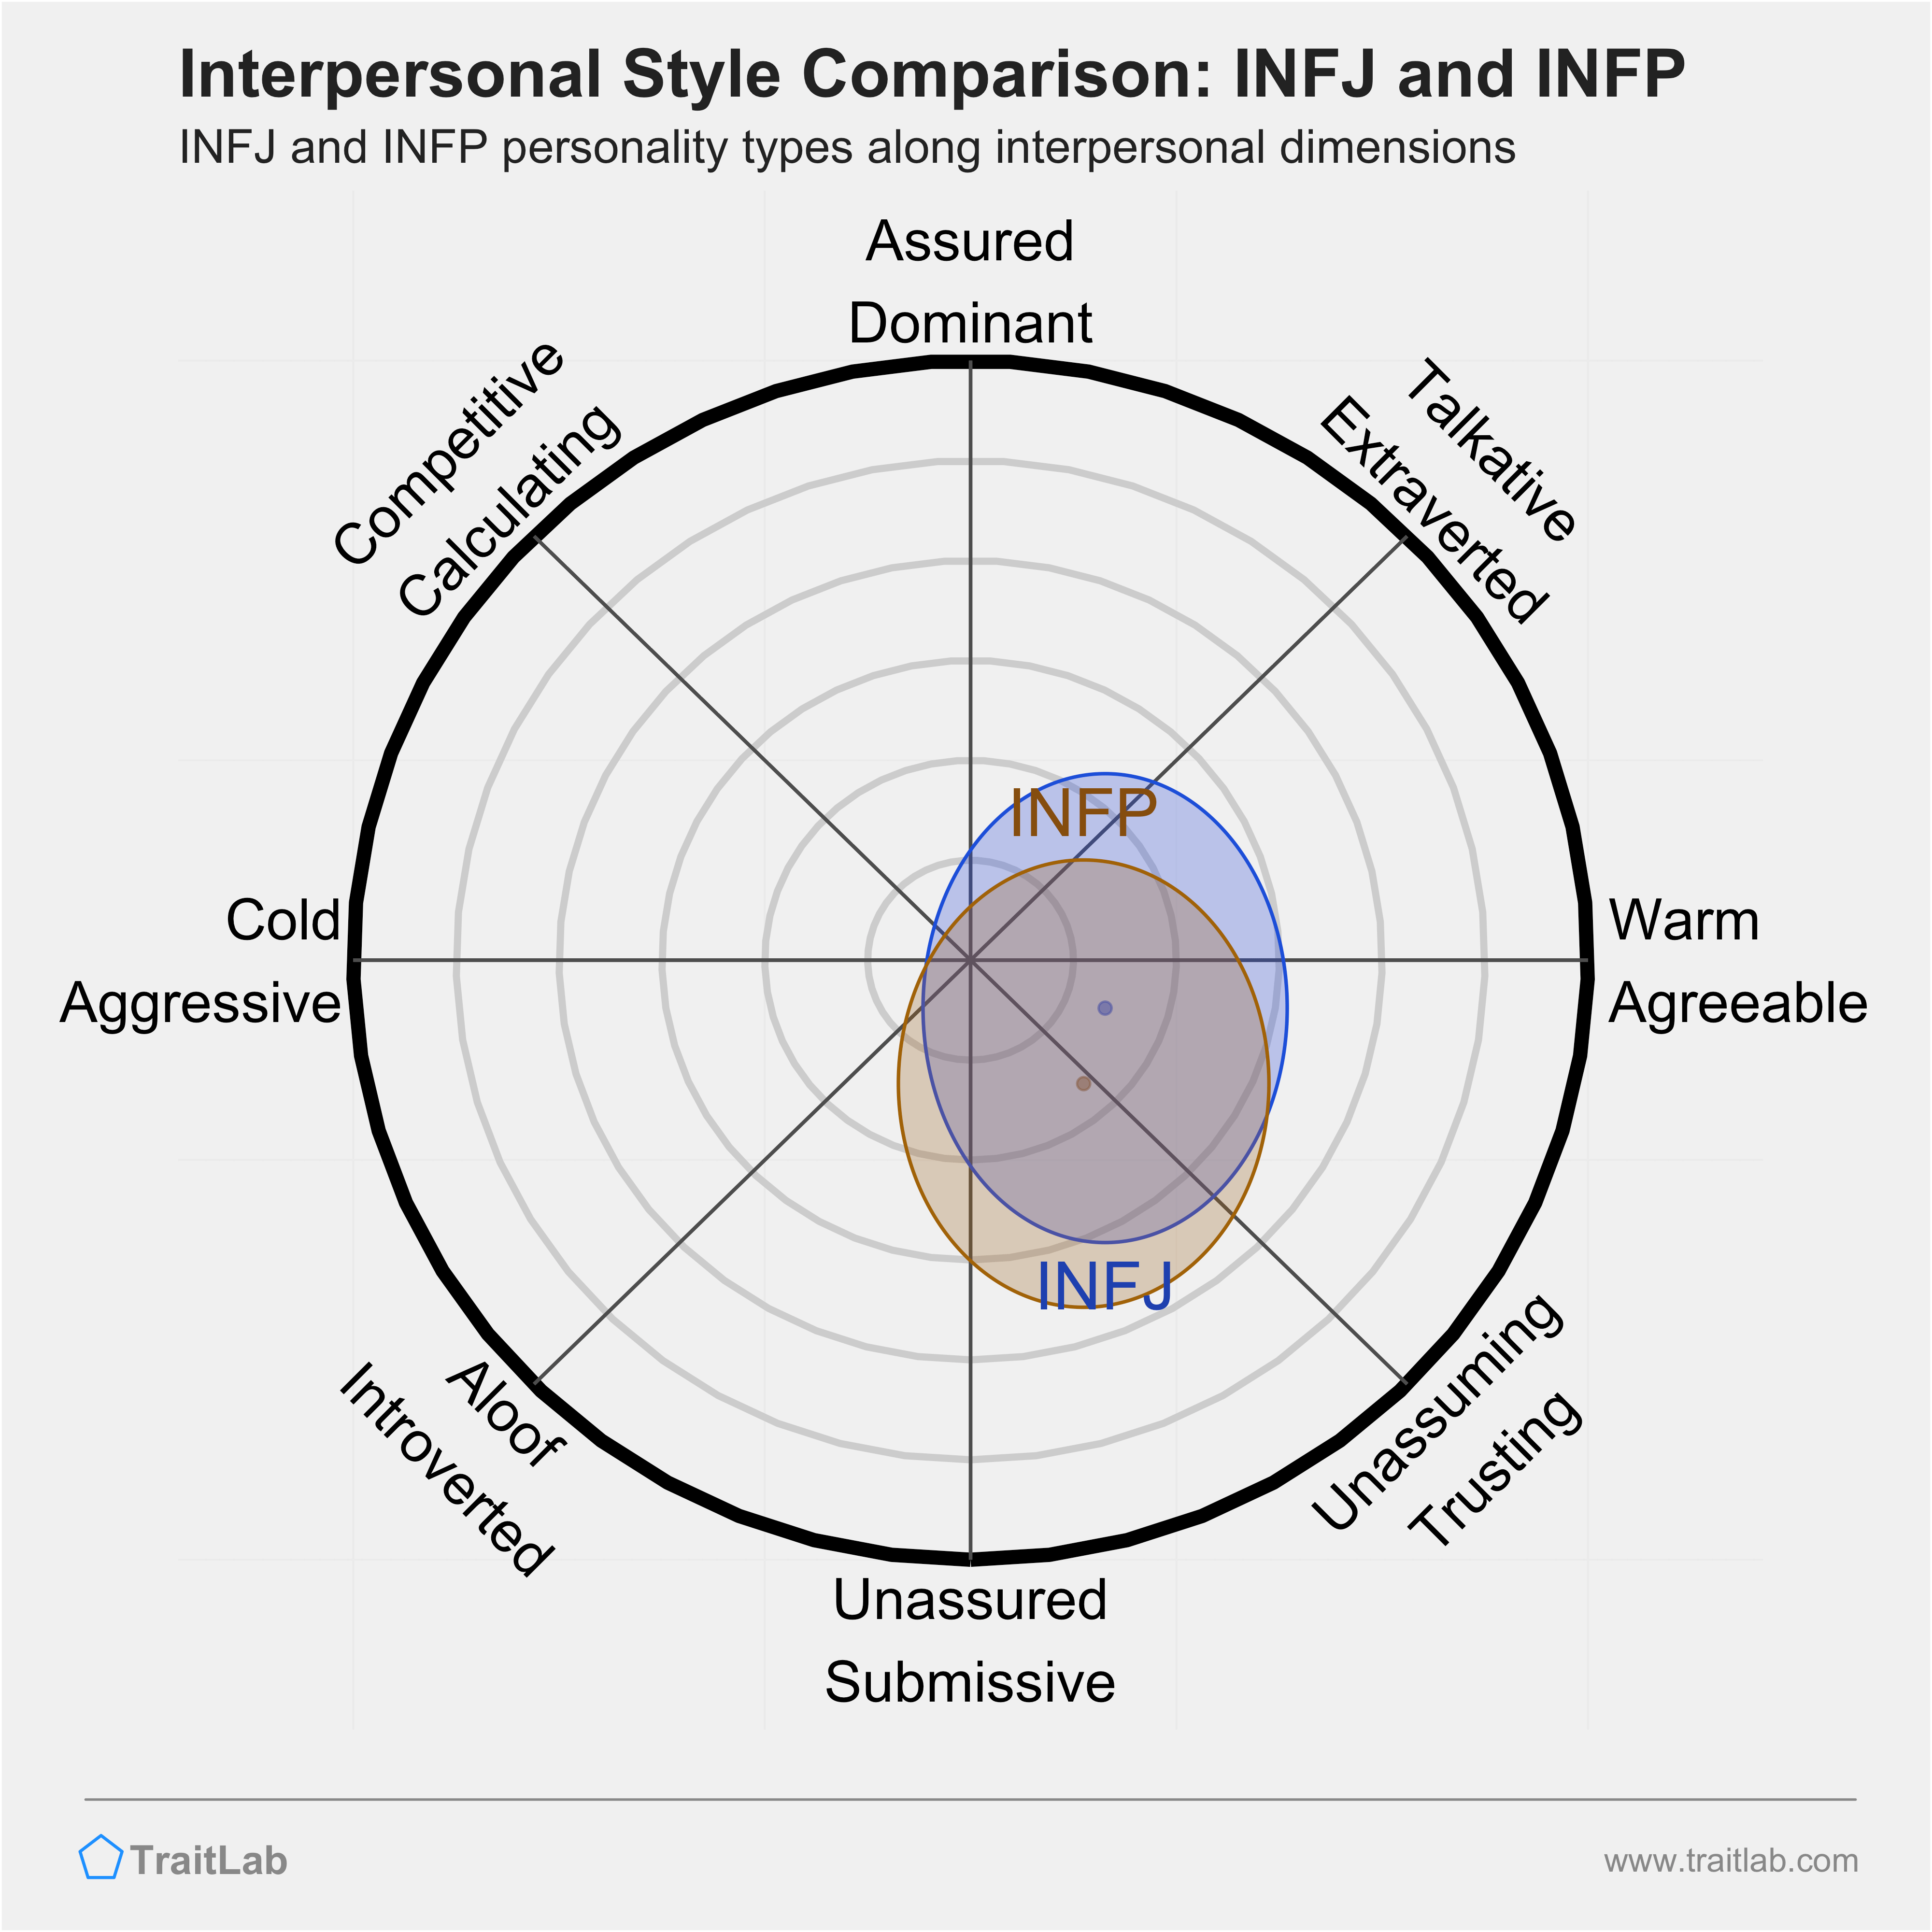 INFJ and INFP comparison across interpersonal dimensions